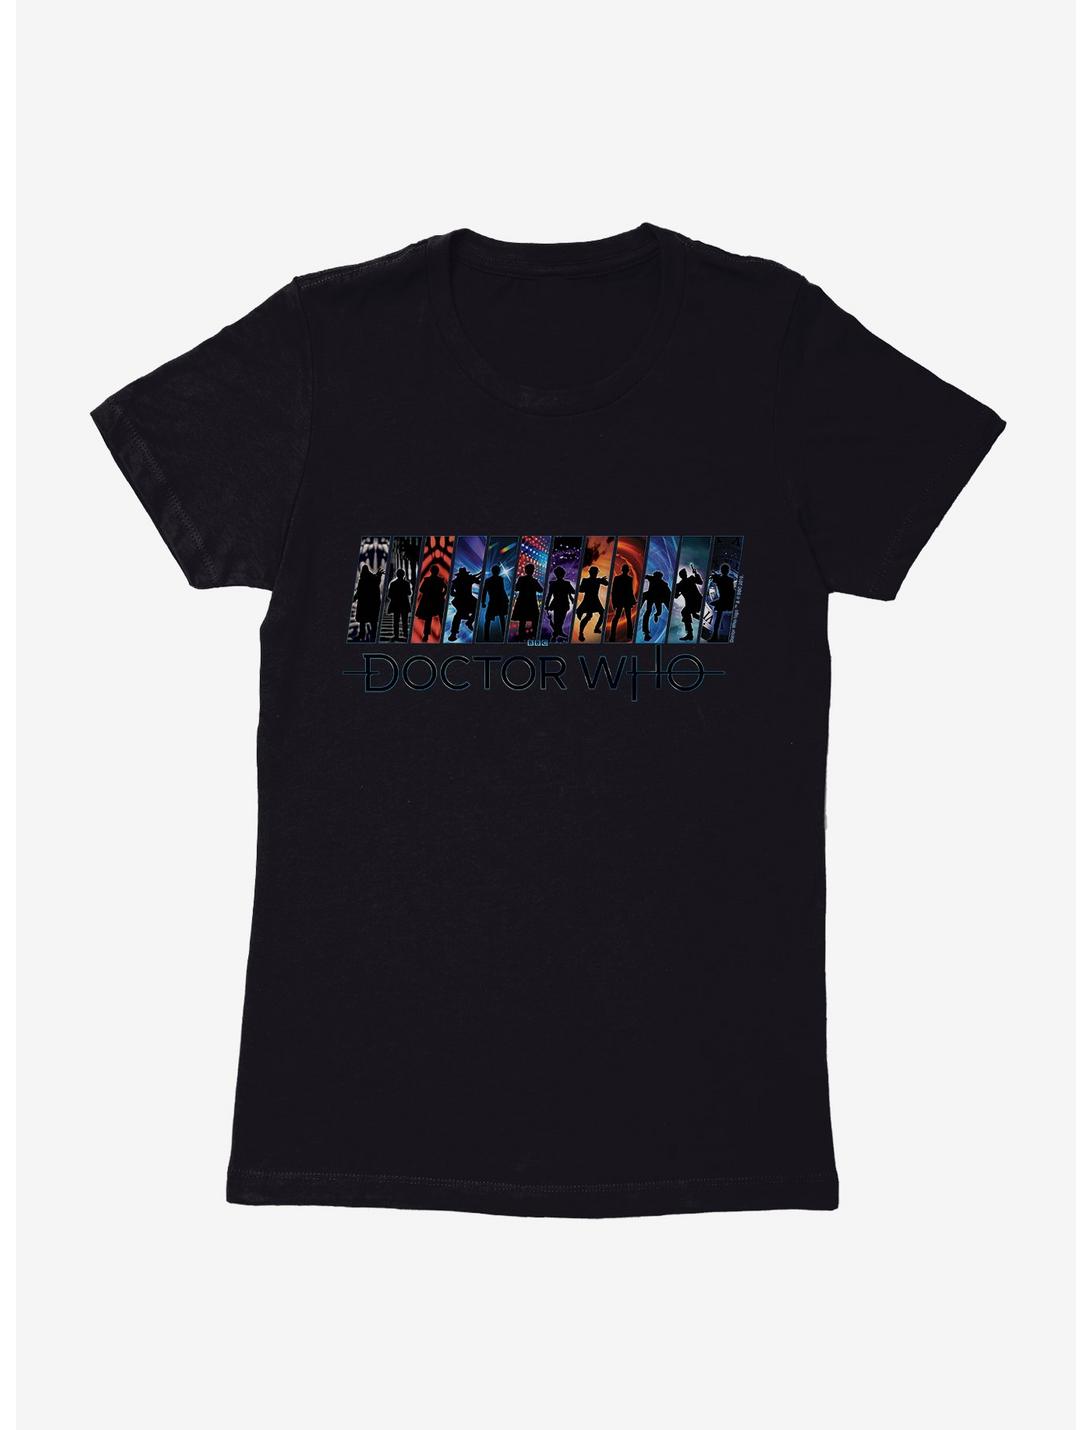 Doctor Who All Doctors Womens T-Shirt, , hi-res